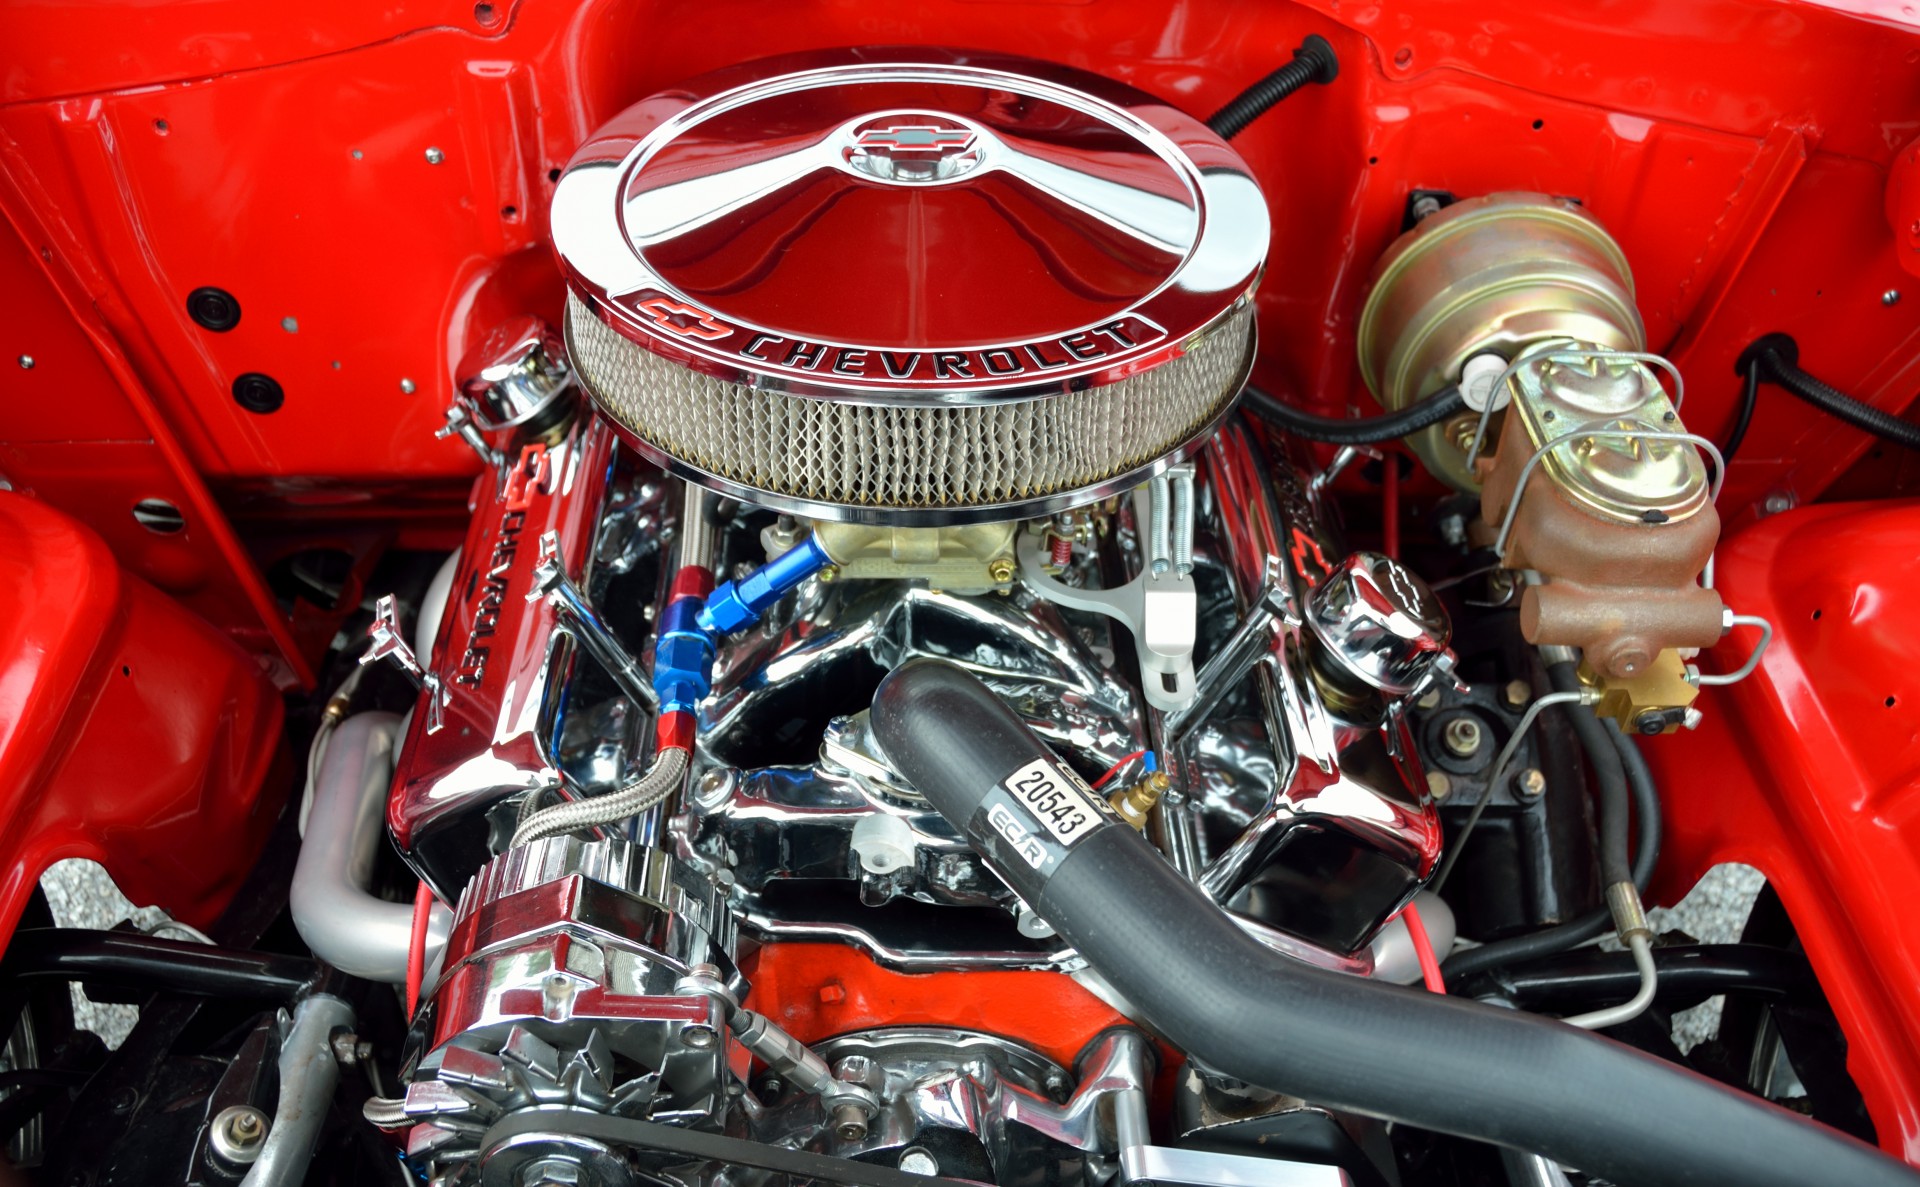 Red Car Engine Bay · Free Stock Photo